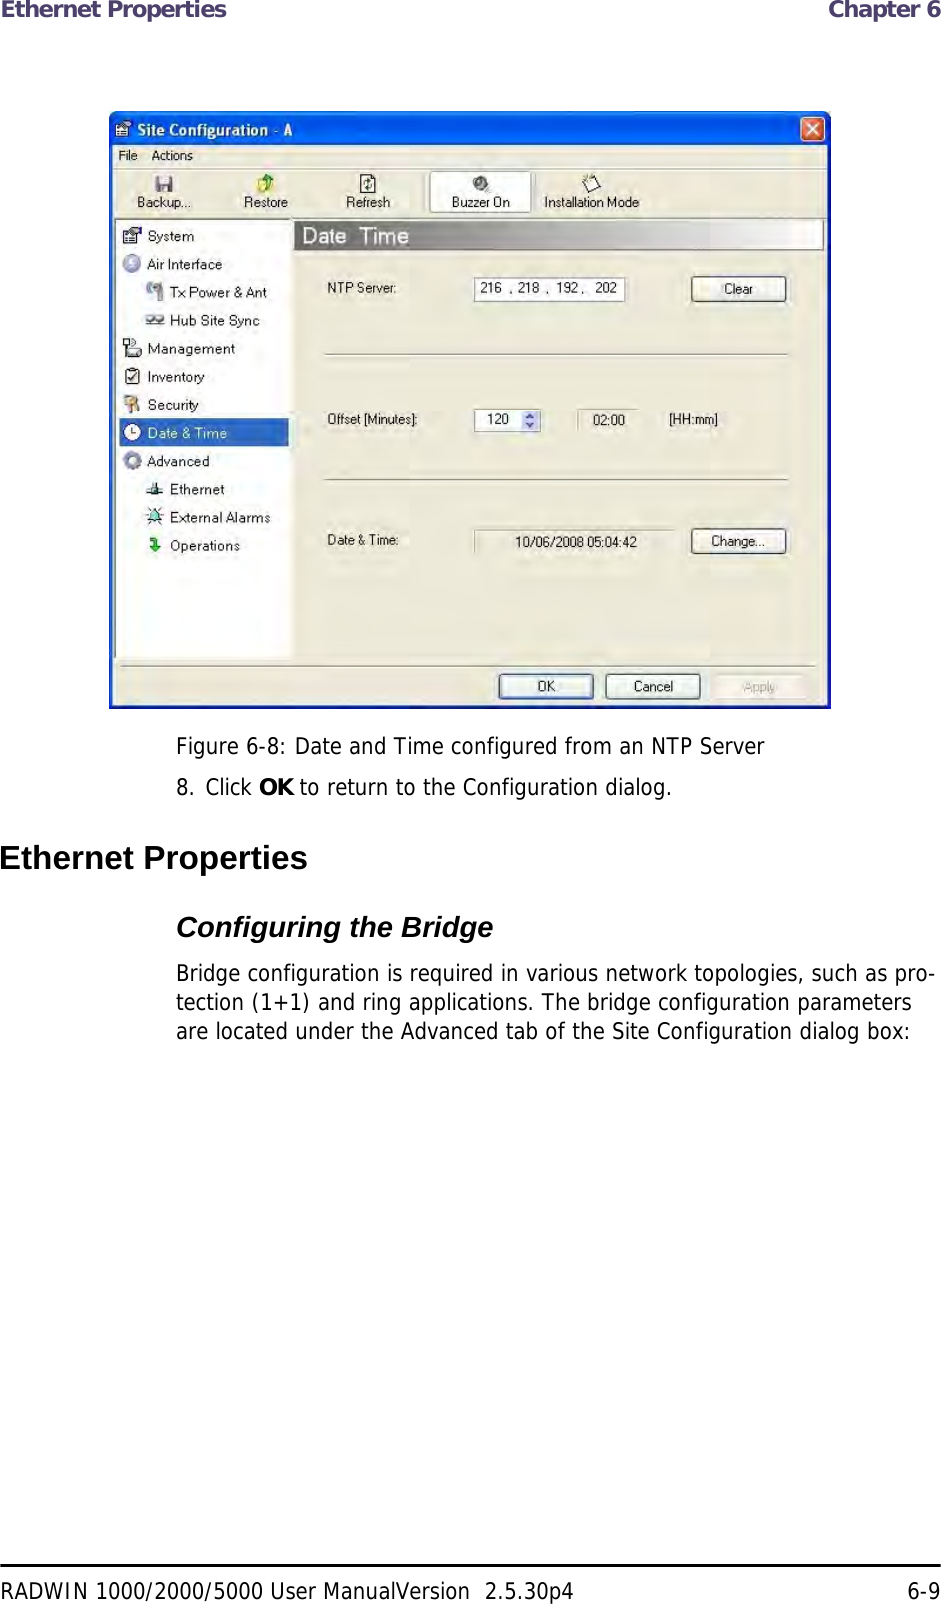 Ethernet Properties  Chapter 6RADWIN 1000/2000/5000 User ManualVersion  2.5.30p4 6-9Figure 6-8: Date and Time configured from an NTP Server8. Click OK to return to the Configuration dialog.Ethernet PropertiesConfiguring the Bridge Bridge configuration is required in various network topologies, such as pro-tection (1+1) and ring applications. The bridge configuration parameters are located under the Advanced tab of the Site Configuration dialog box: